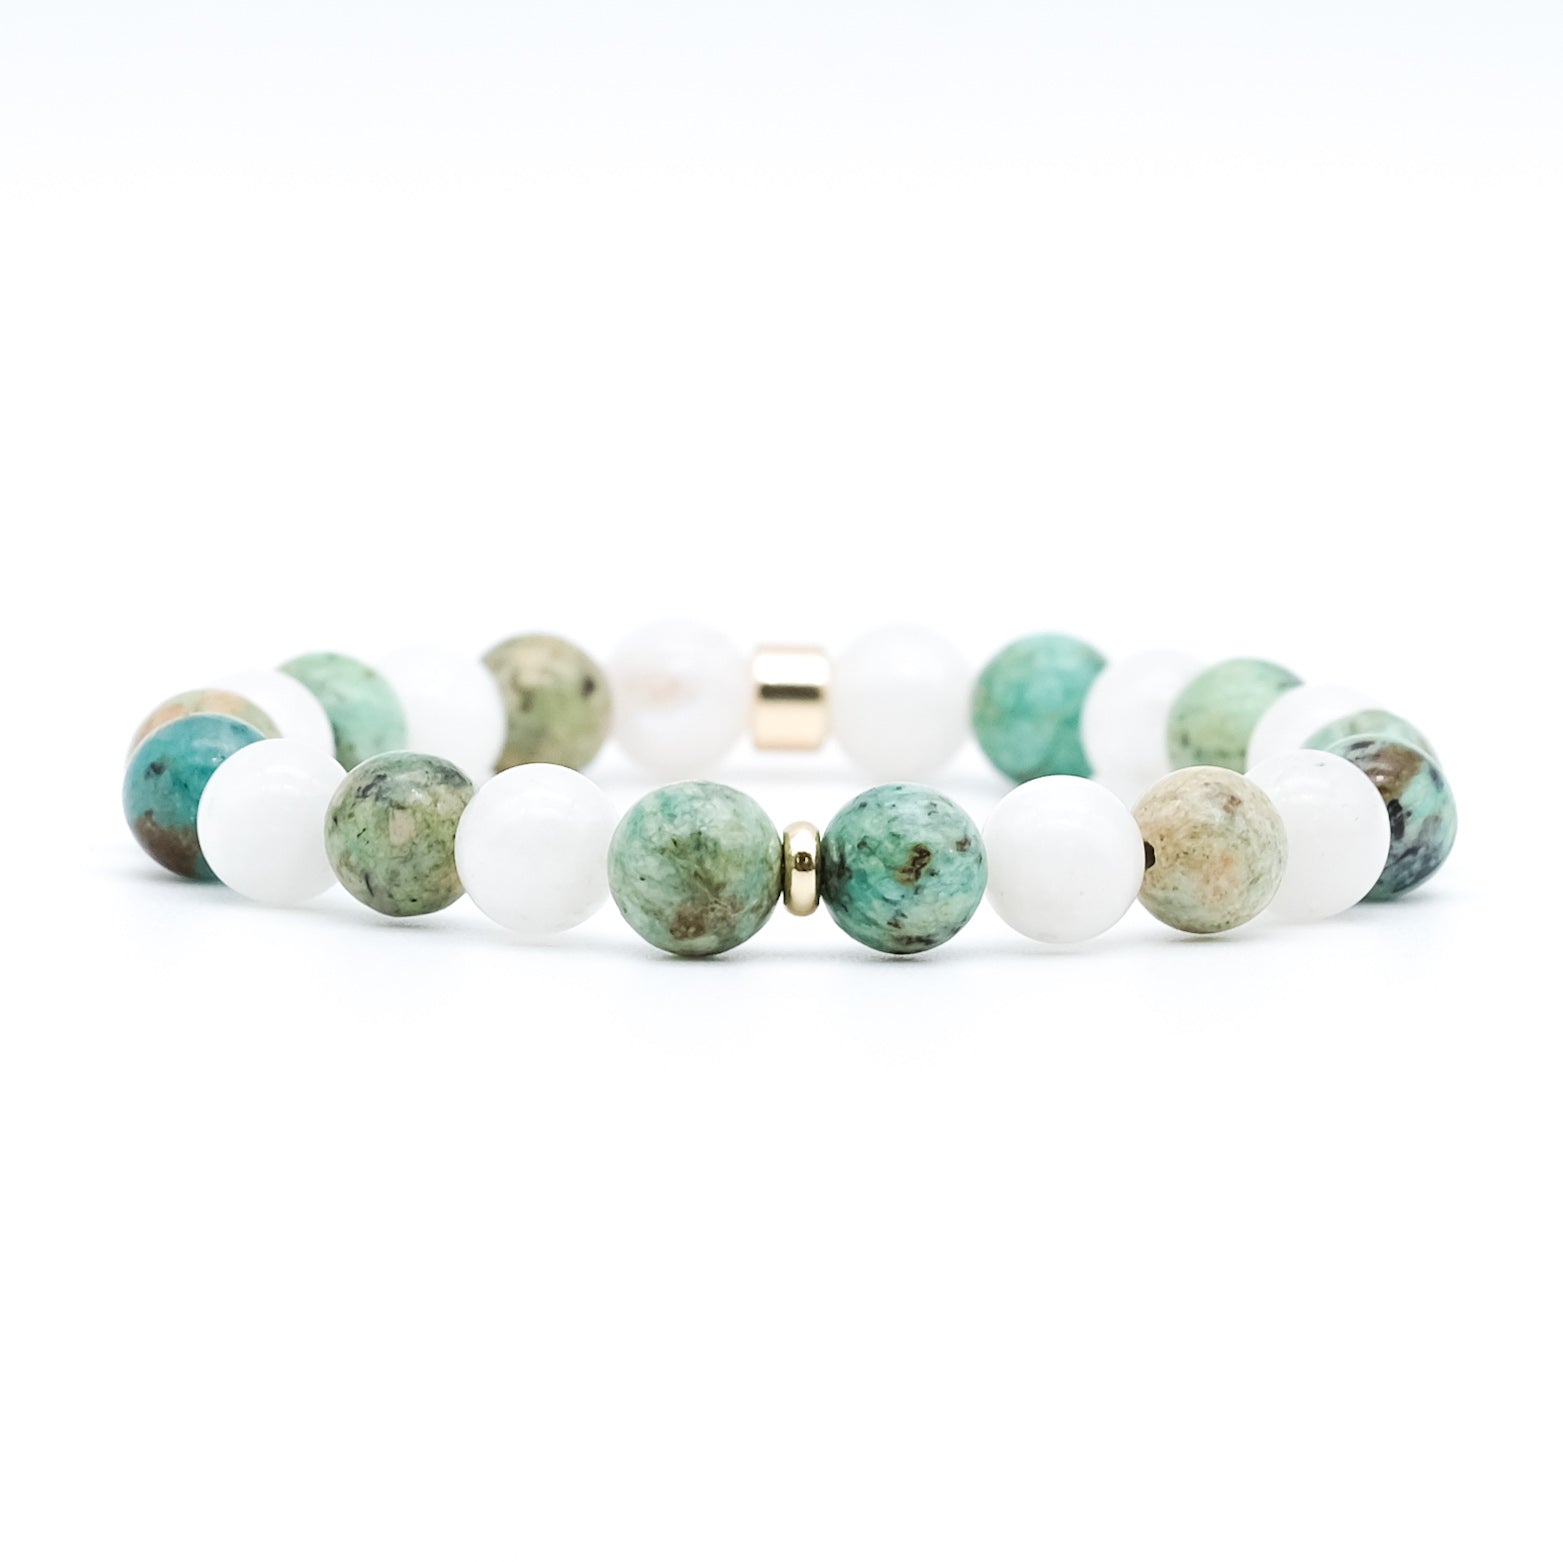 A moonstone and chrysocolla gemstone bracelet with gold accessories